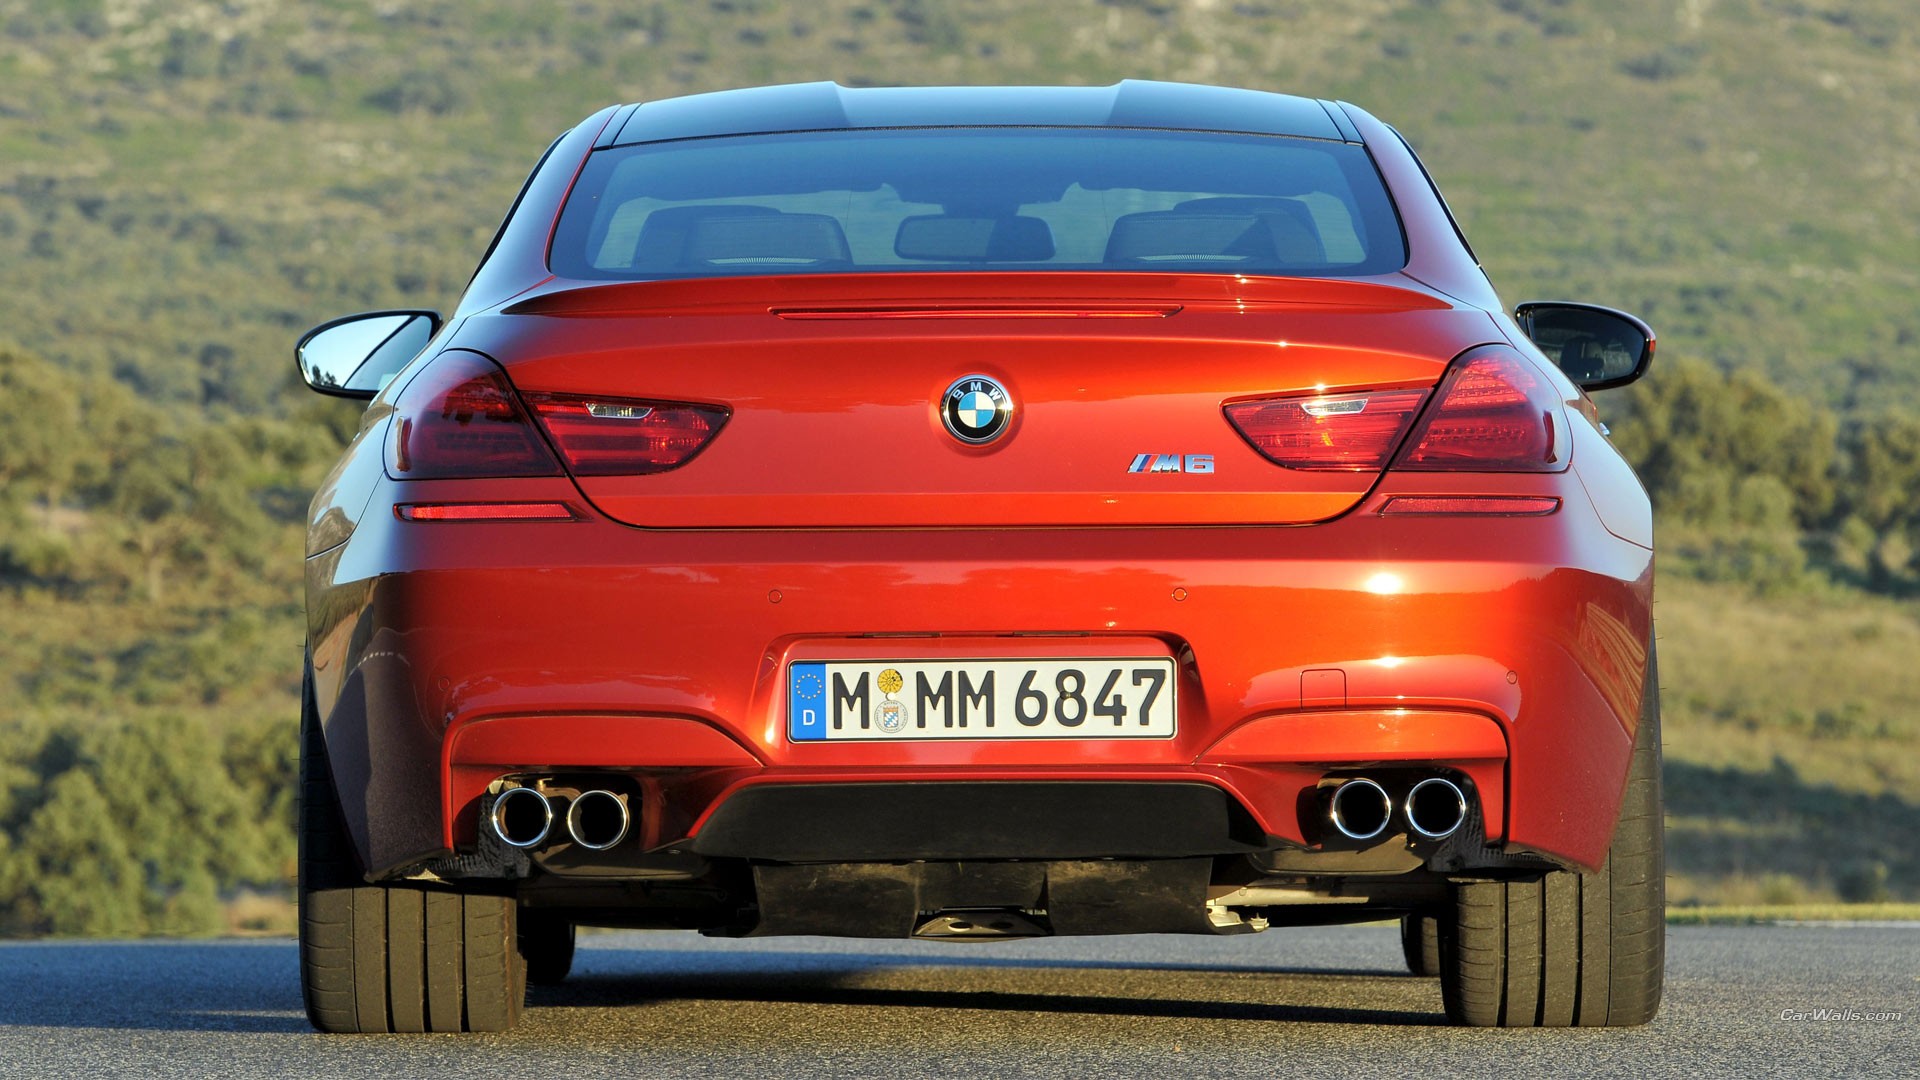 General 1920x1080 BMW M6 coupe BMW red cars car BMW F12/F13/F06 BMW 6 Series rear view vehicle